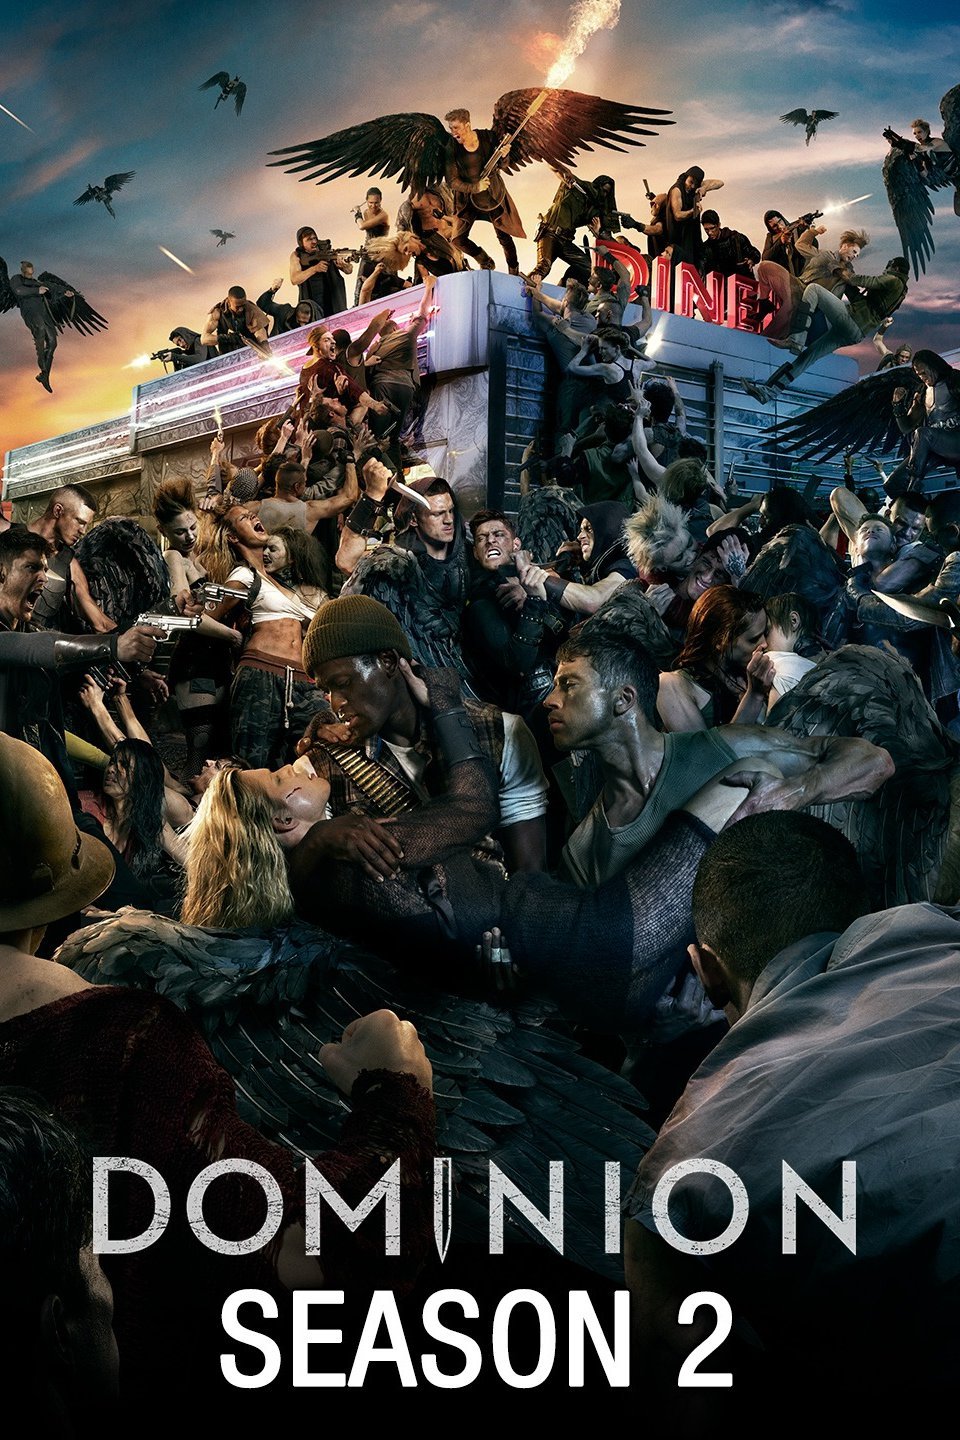 Dominion Season 2 Complete Hindi Dubbed ORG All Episodes 480p WEB-DL 1.4GB Download